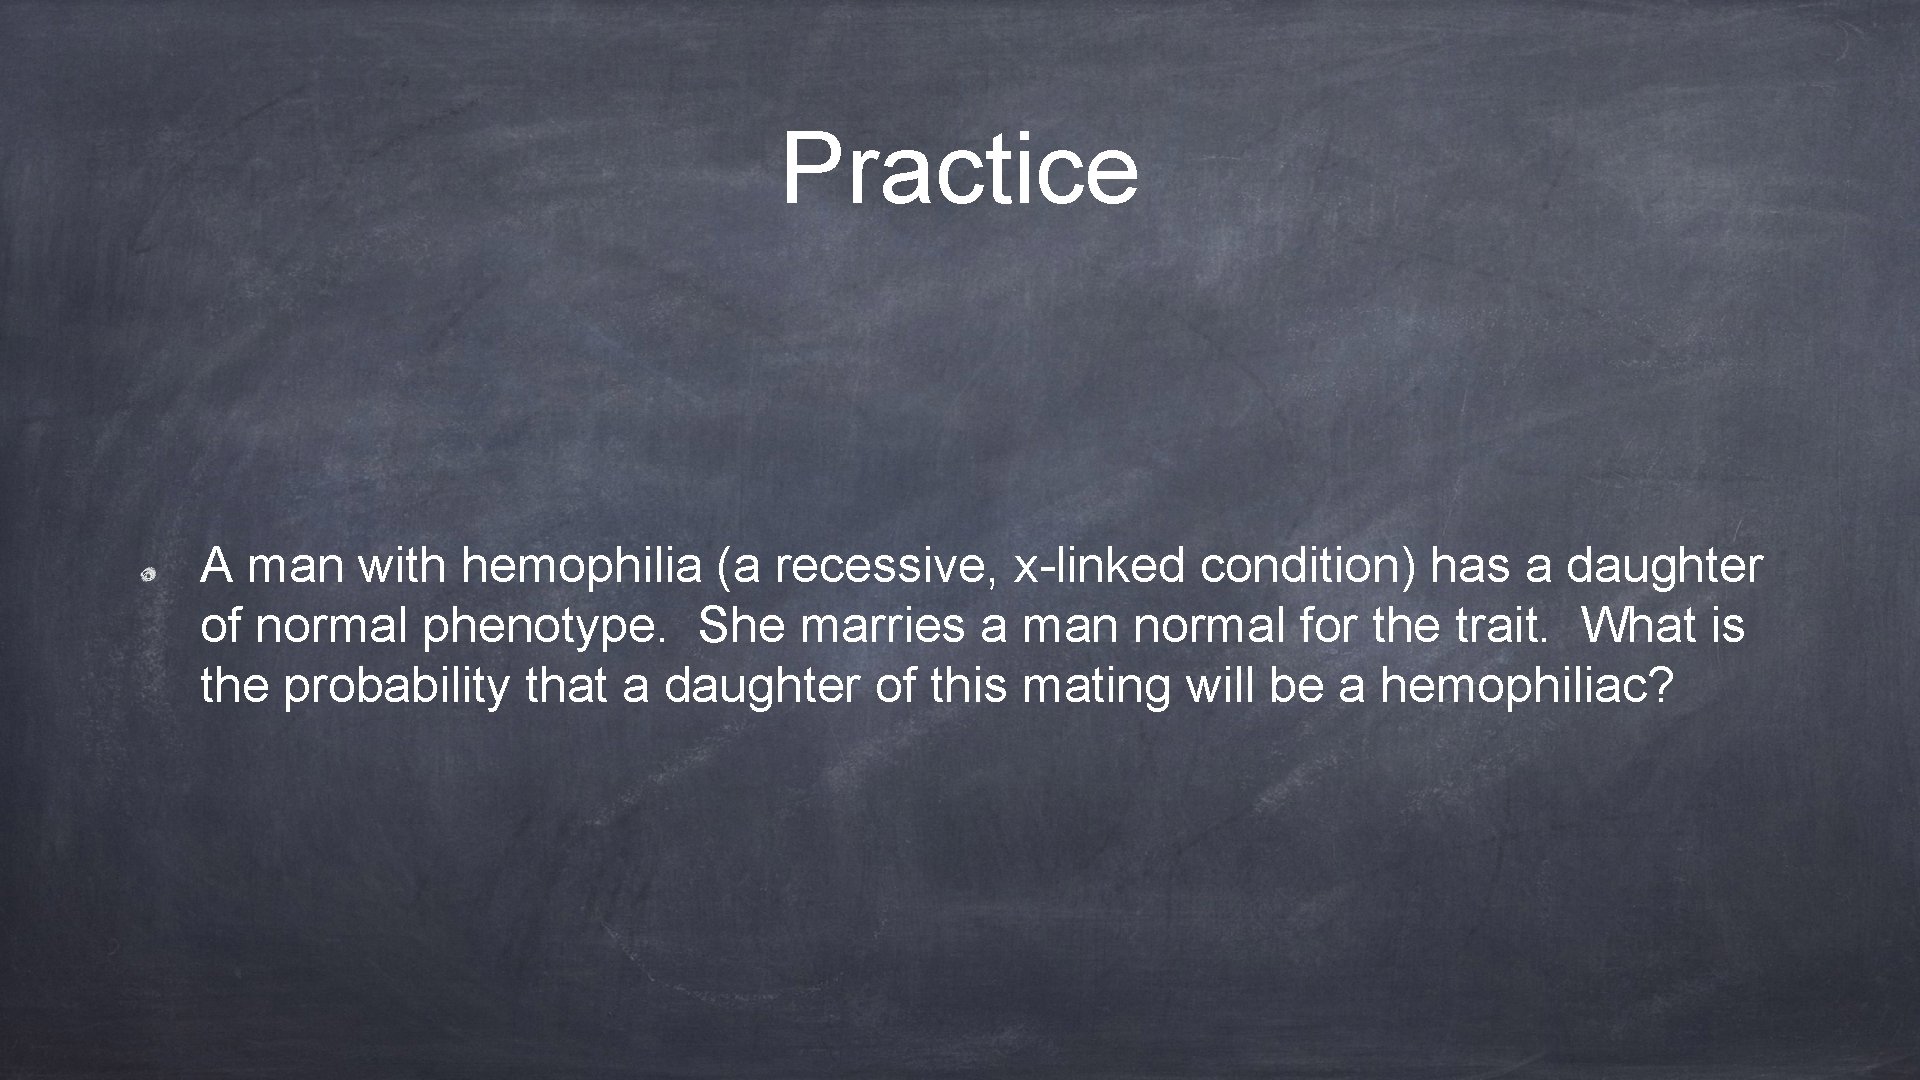 Practice A man with hemophilia (a recessive, x-linked condition) has a daughter of normal